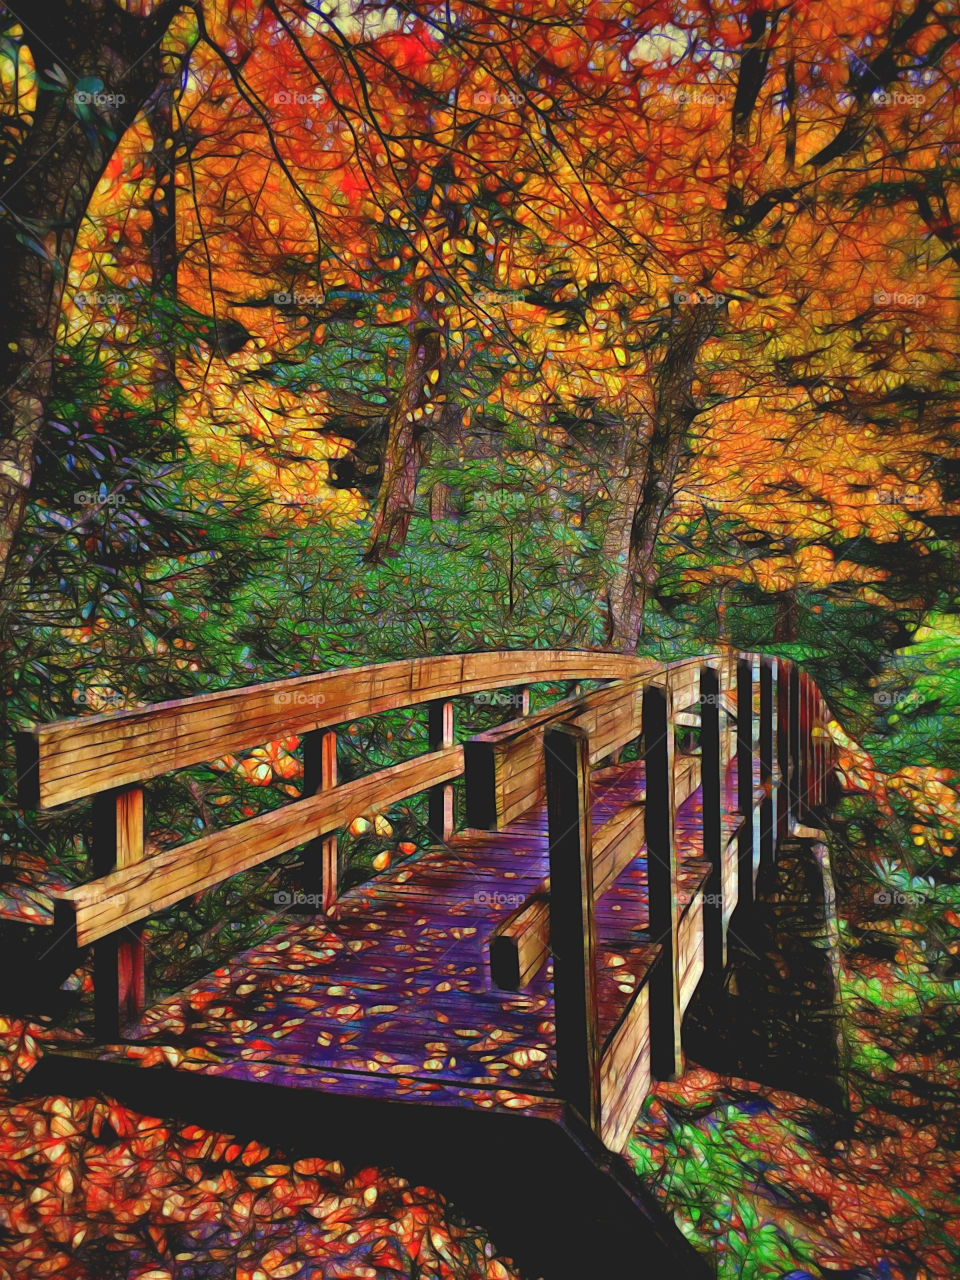 Bridge to an Enchanted Forest